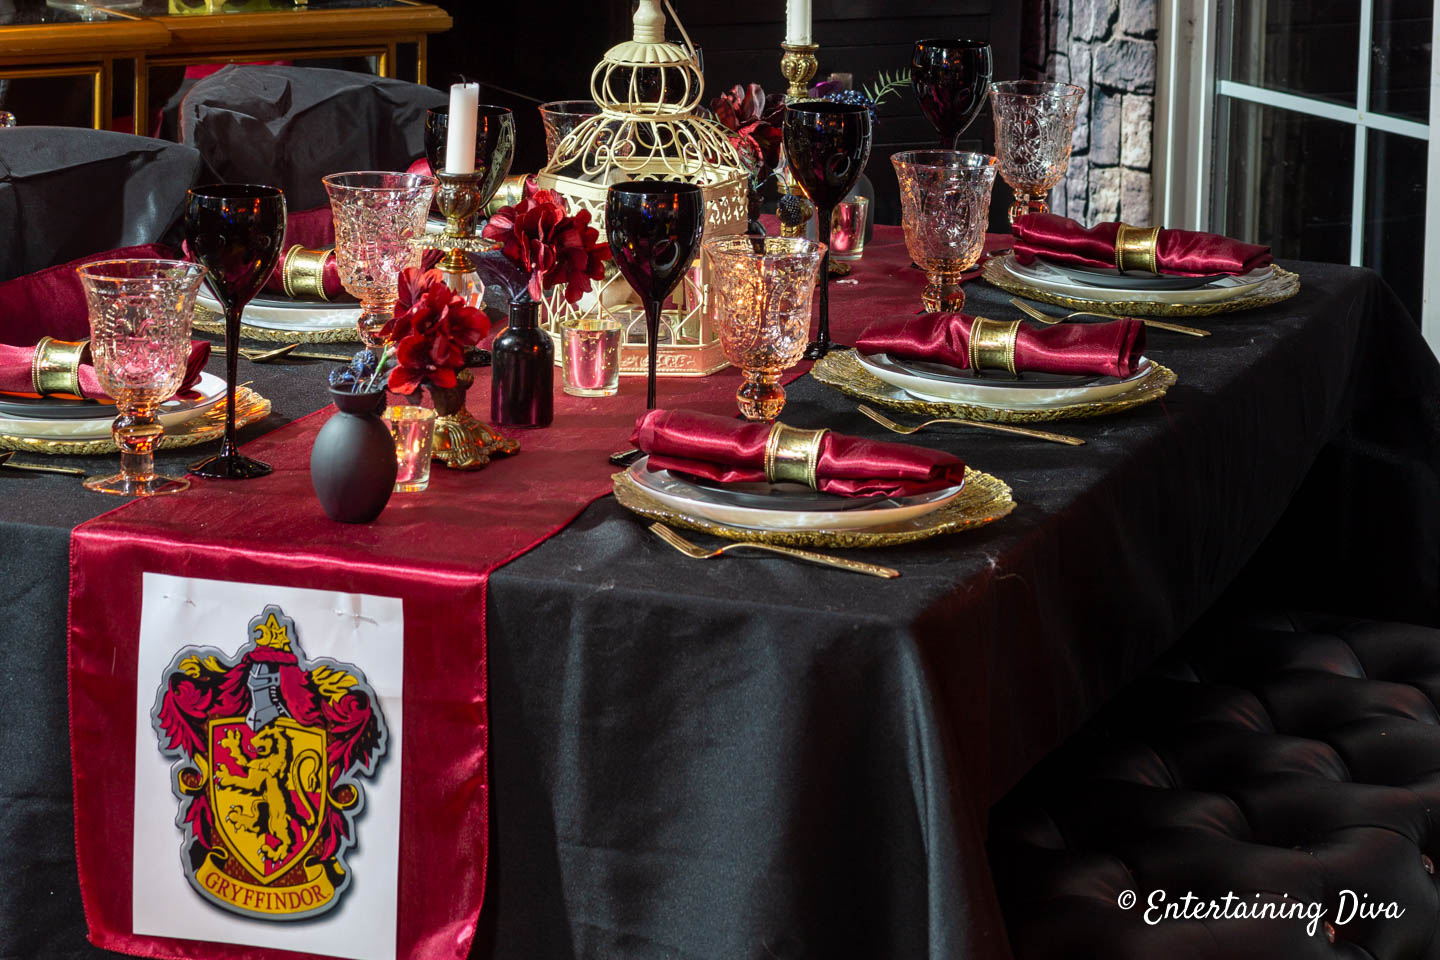 Harry Potter table decor for Gryffindor house using red table runner and napkins with a black tablecloth and black wine glasses